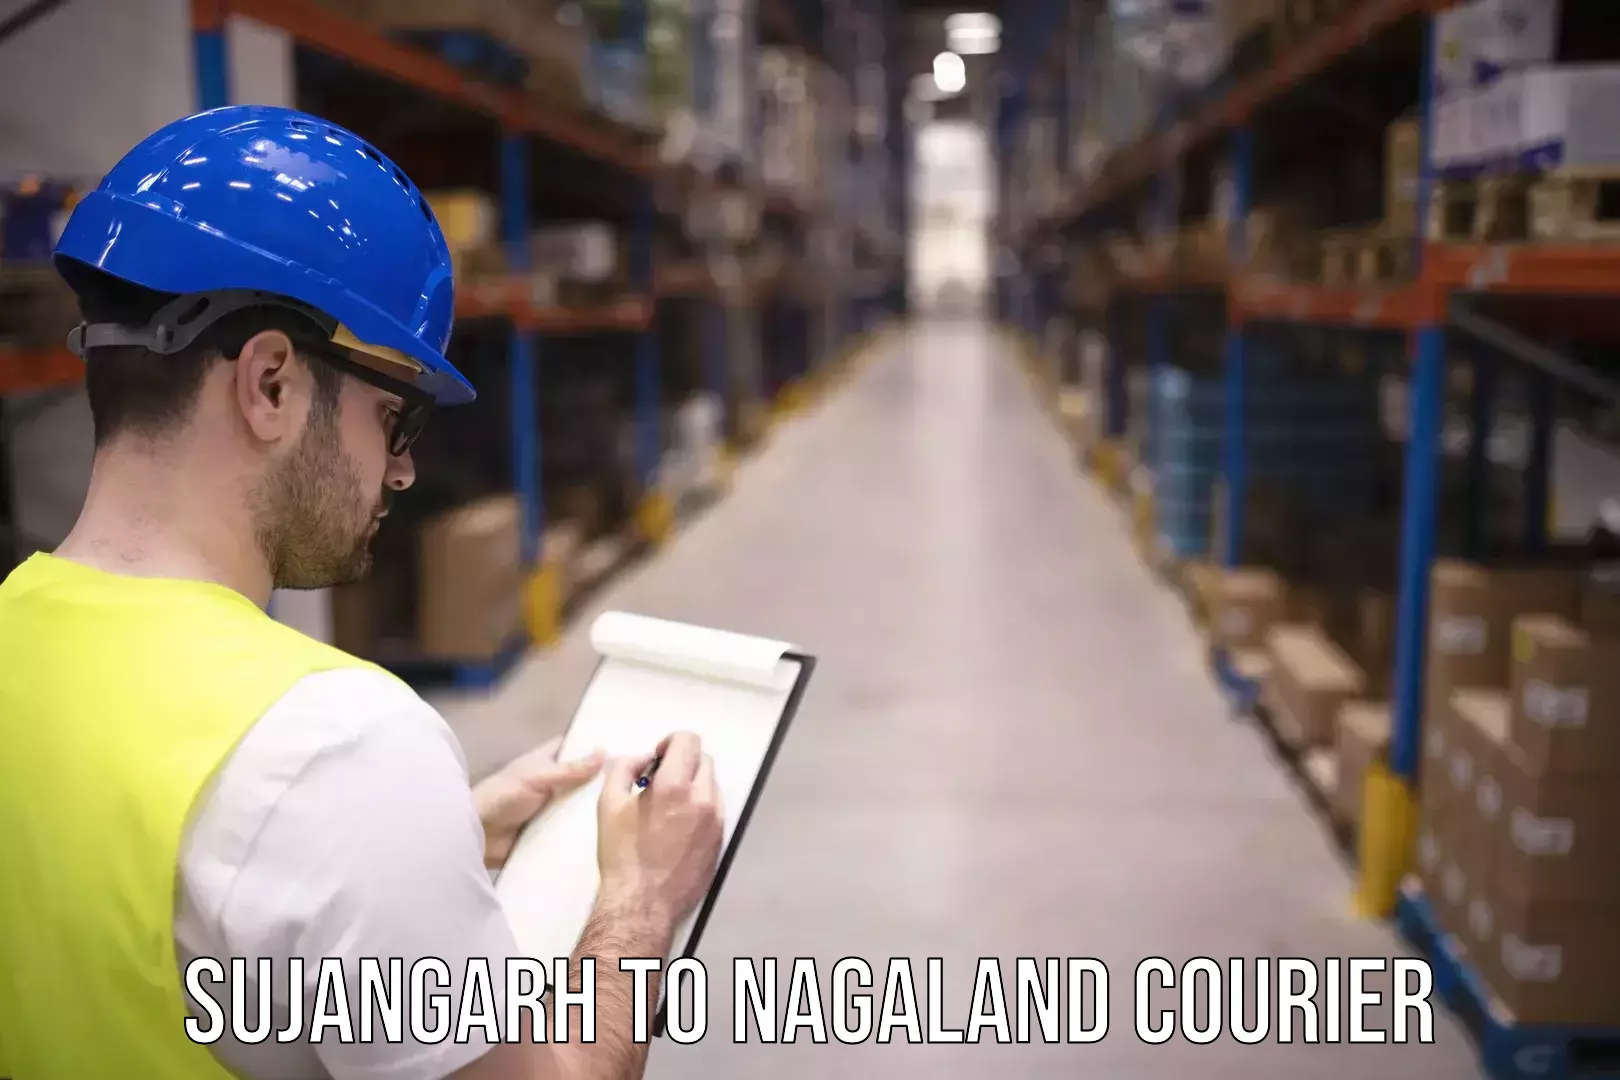 State-of-the-art courier technology Sujangarh to Nagaland